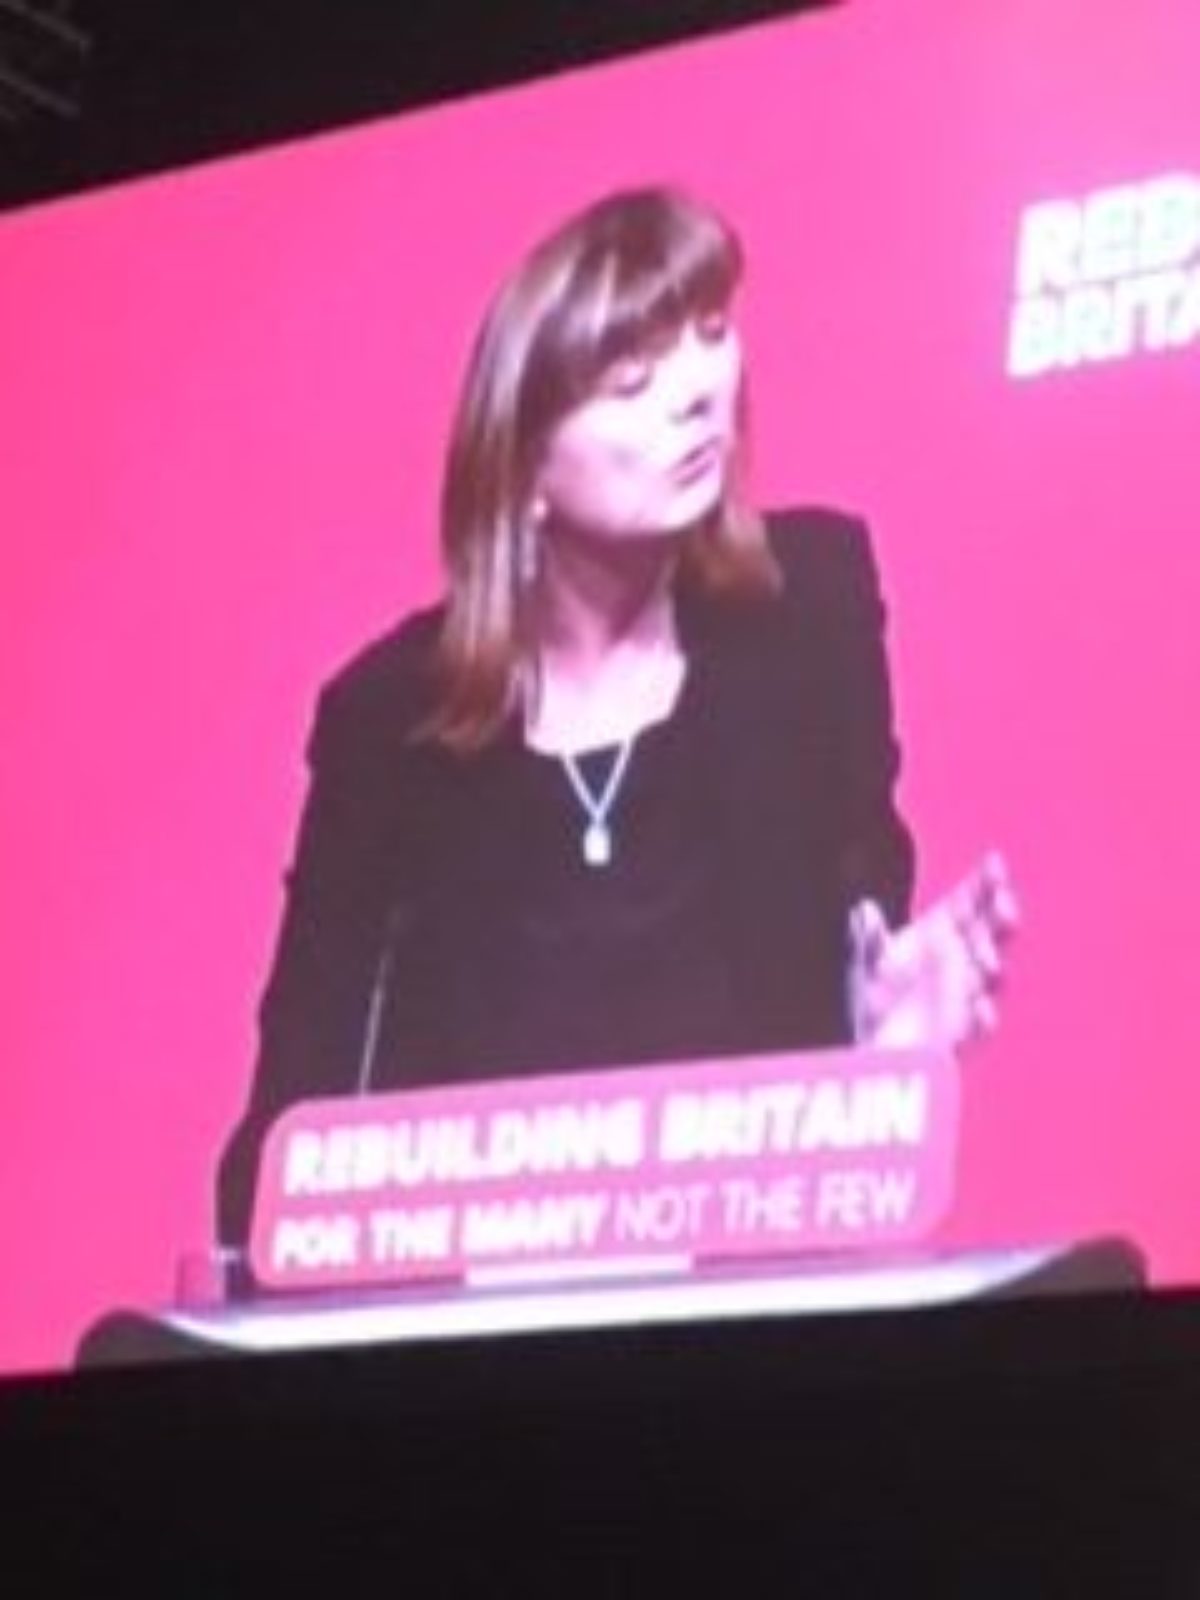 Sally Hunt speaking on behalf of the TUC at Labour party conference on the 150th  year of the TUC.